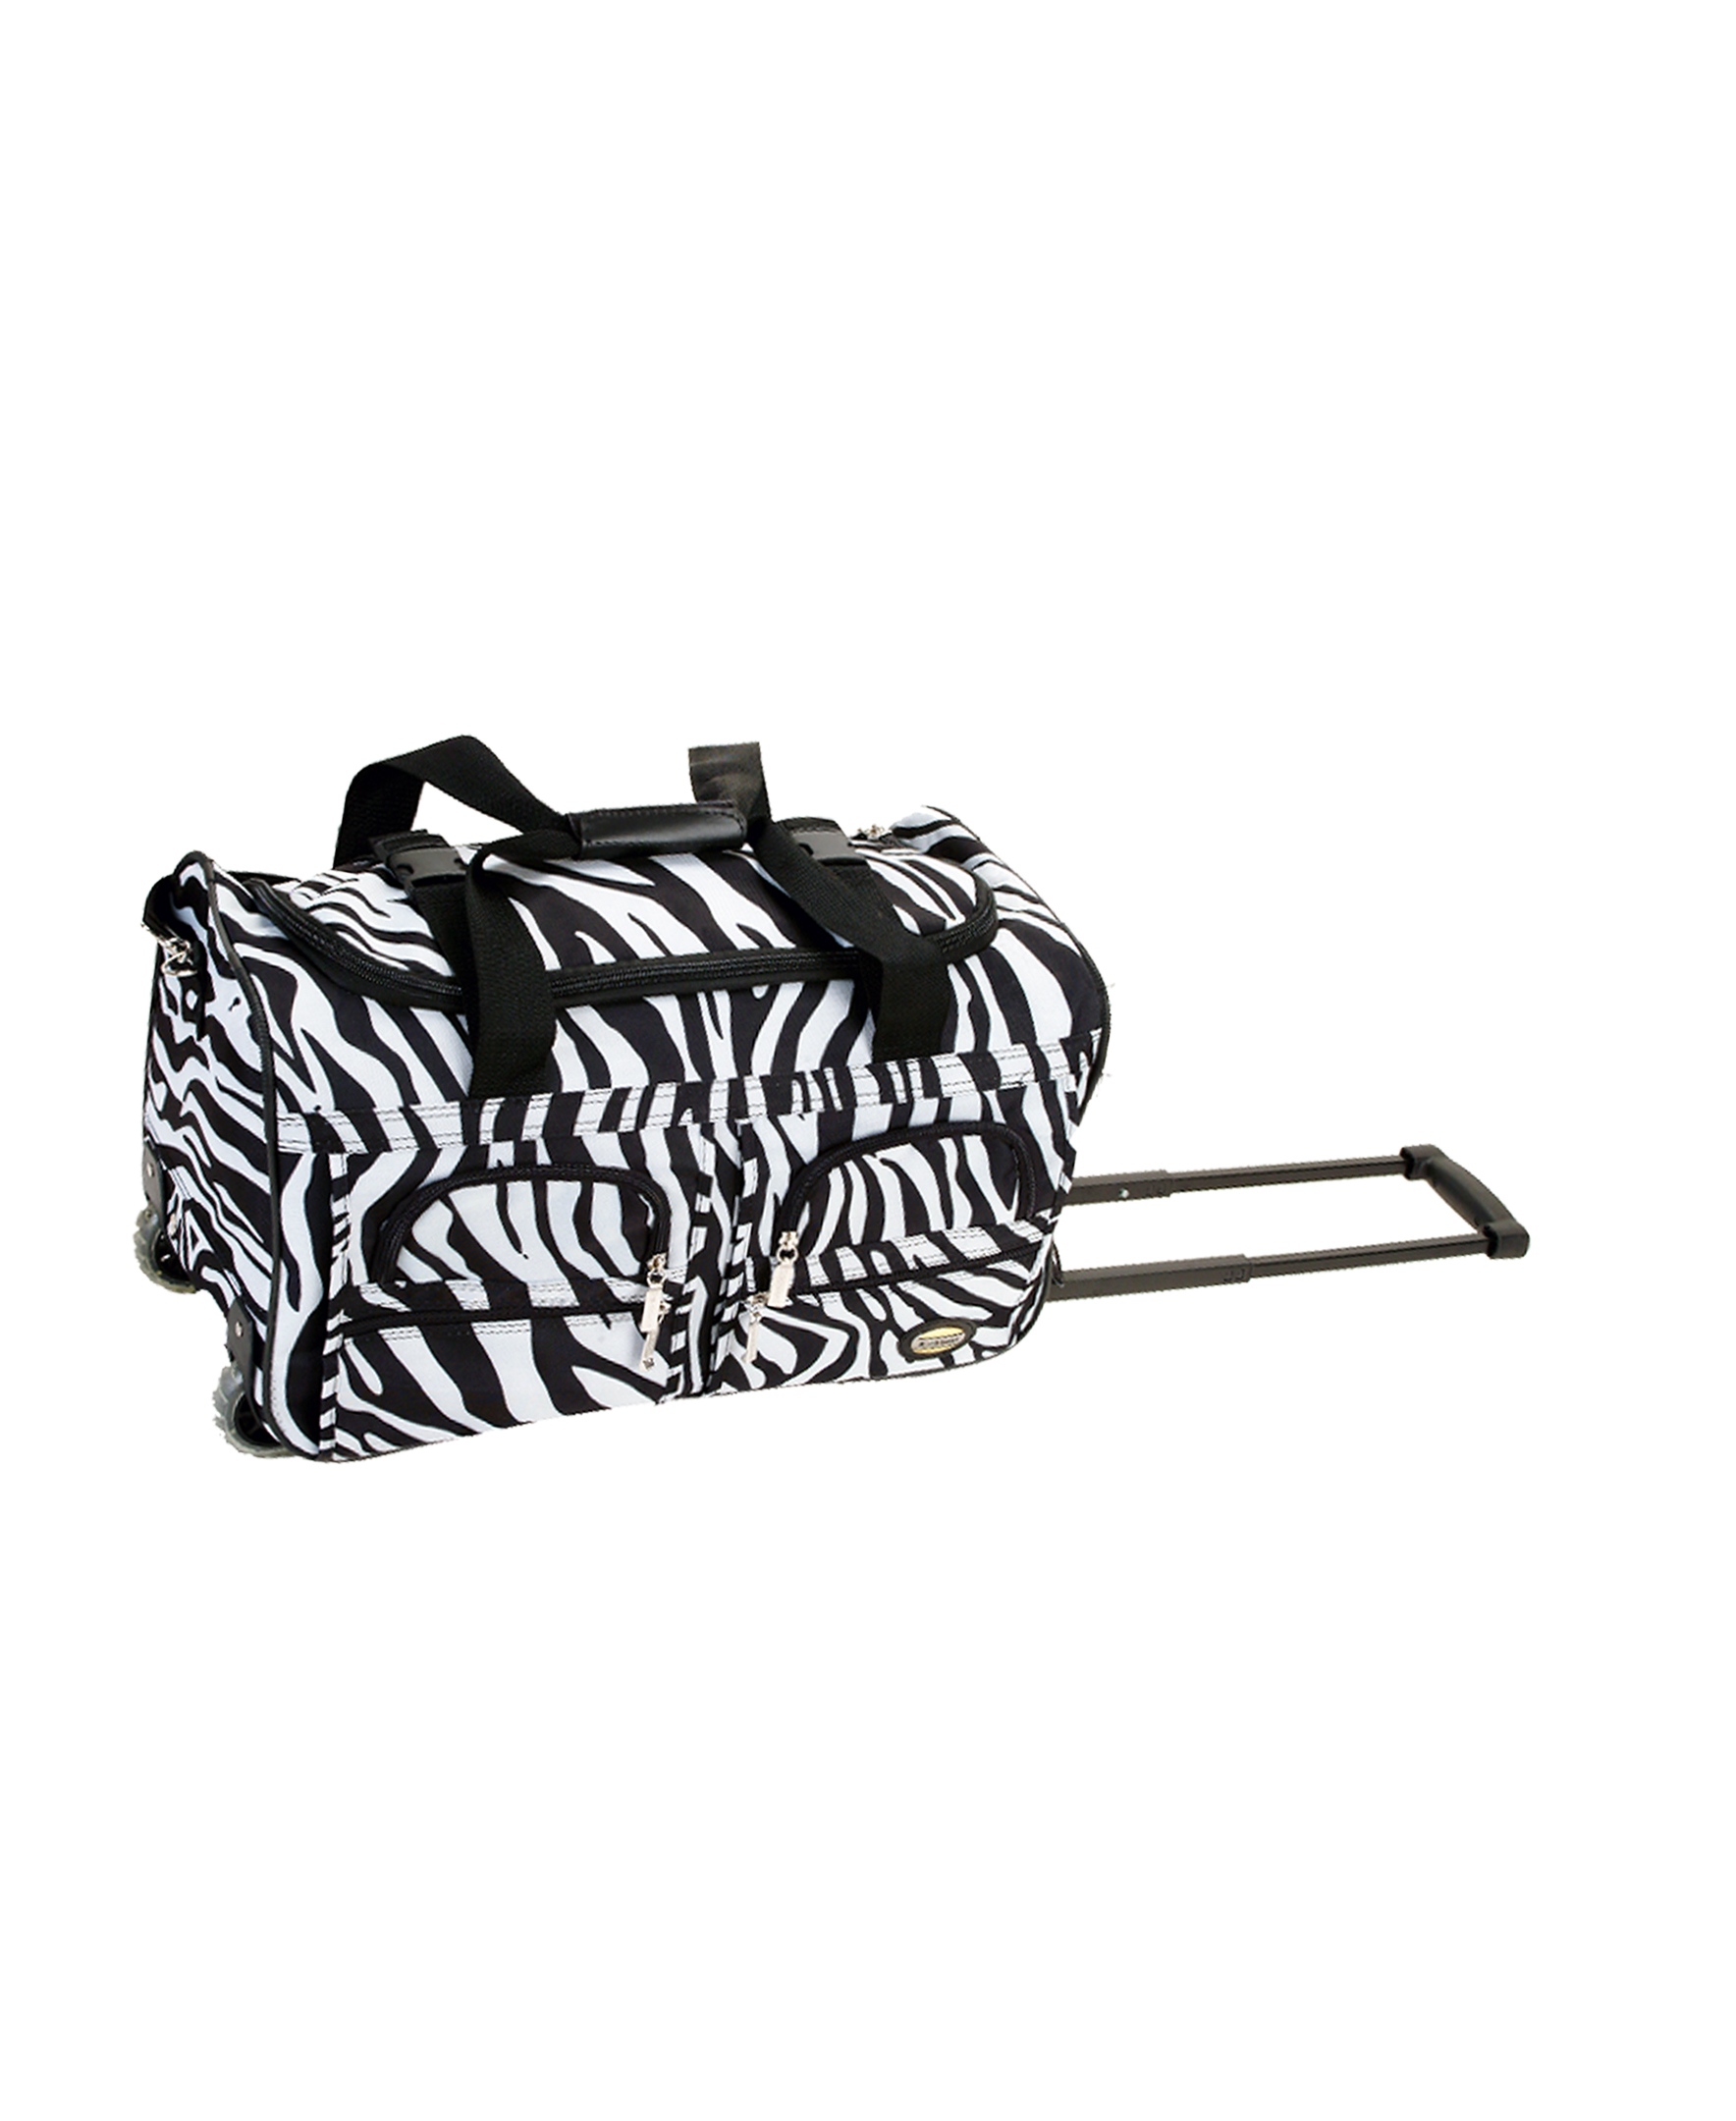 Rockland Luggage 22 Rolling Duffle Bag, Multiple Colors - image 1 of 6